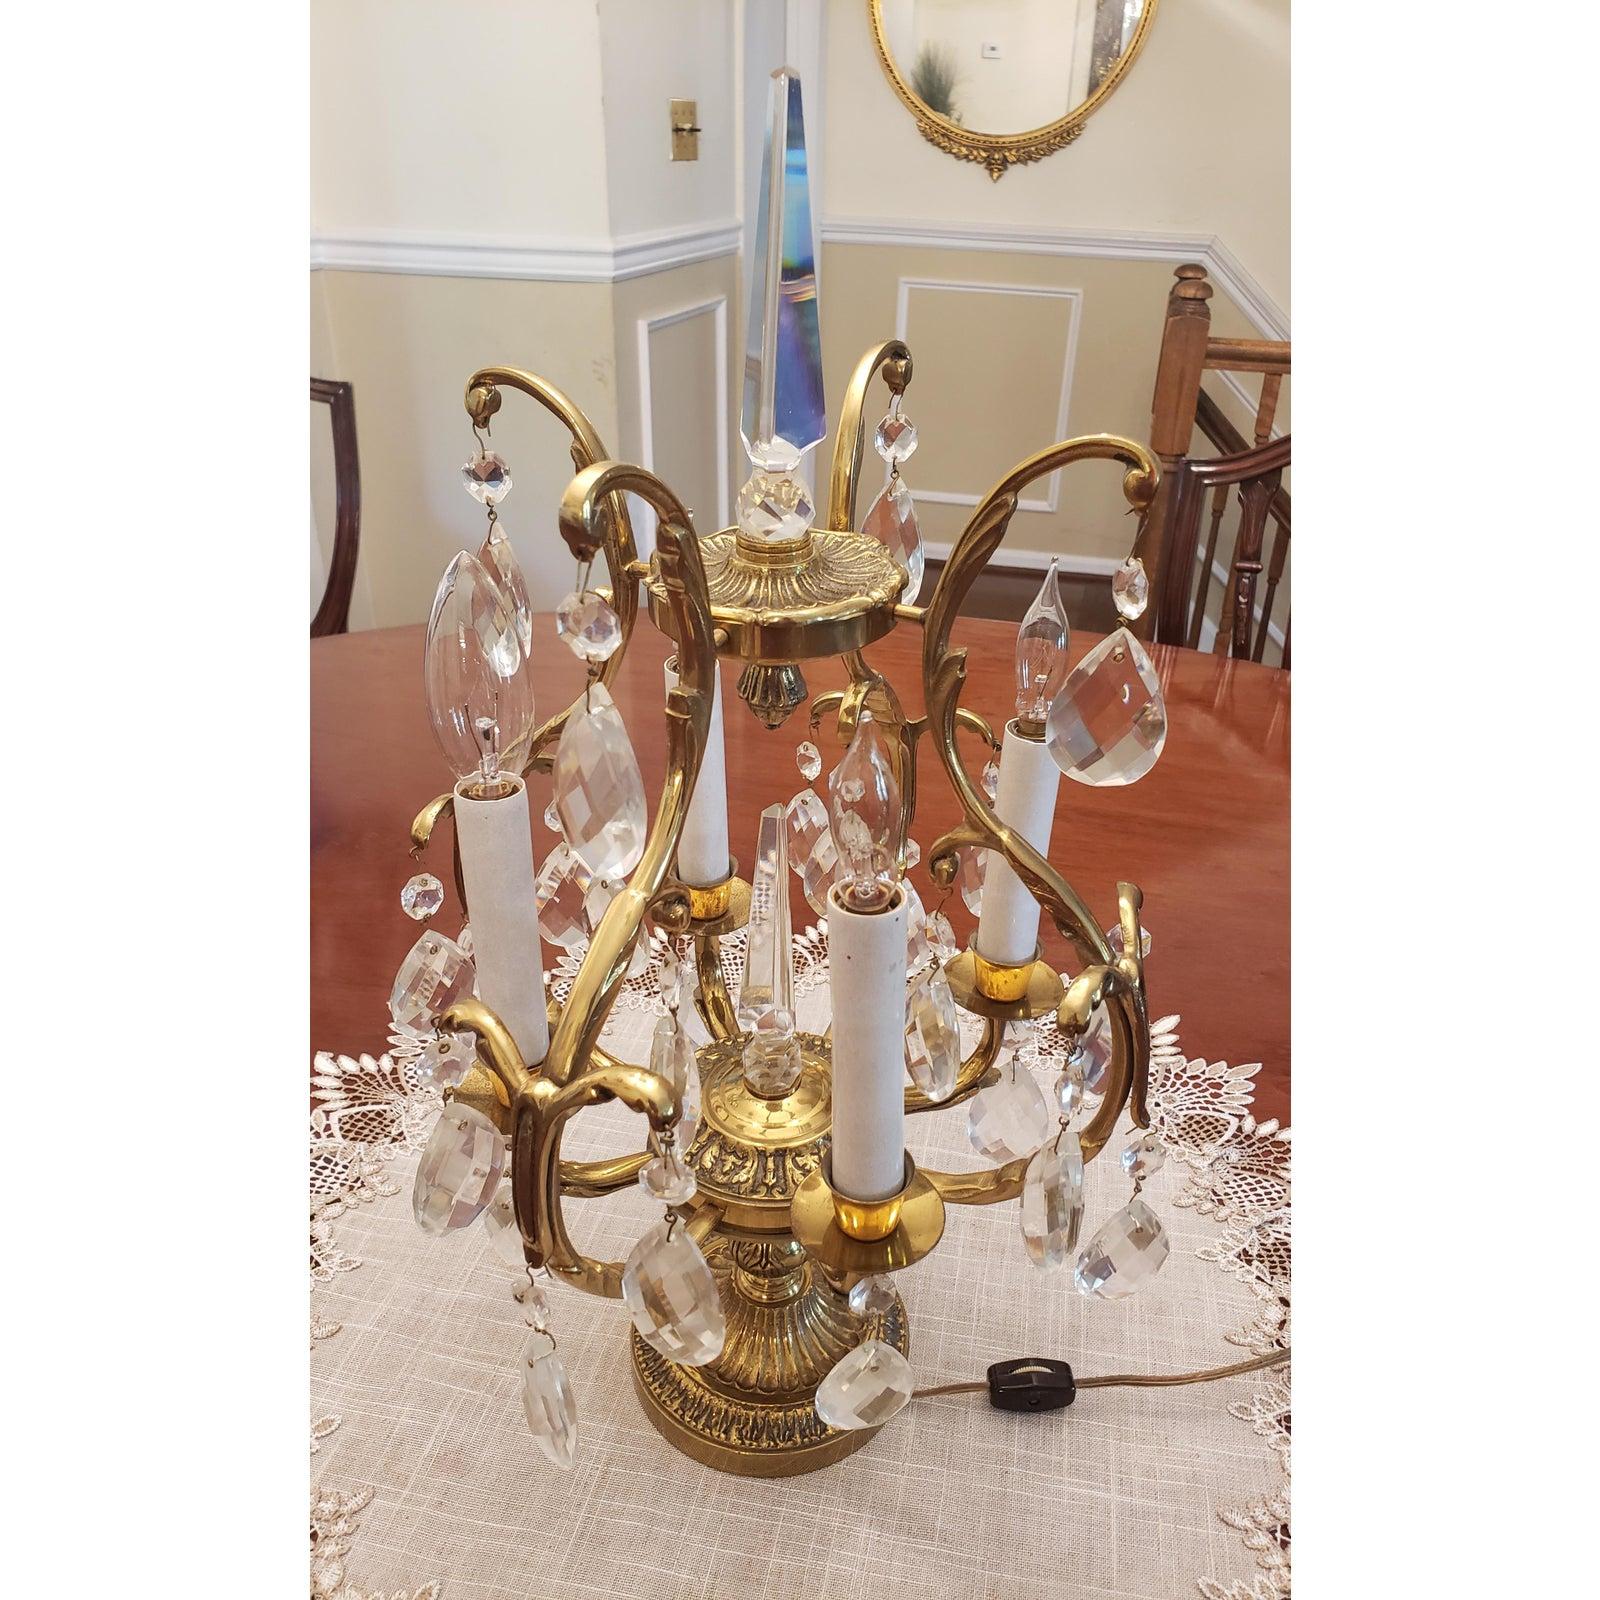 Italian vintage solid brass and crystal table chandelier. Crystals are slightly over an inch wide and about 2inches tall. Solid brass base is 5 inches in diameter. The piece is 11